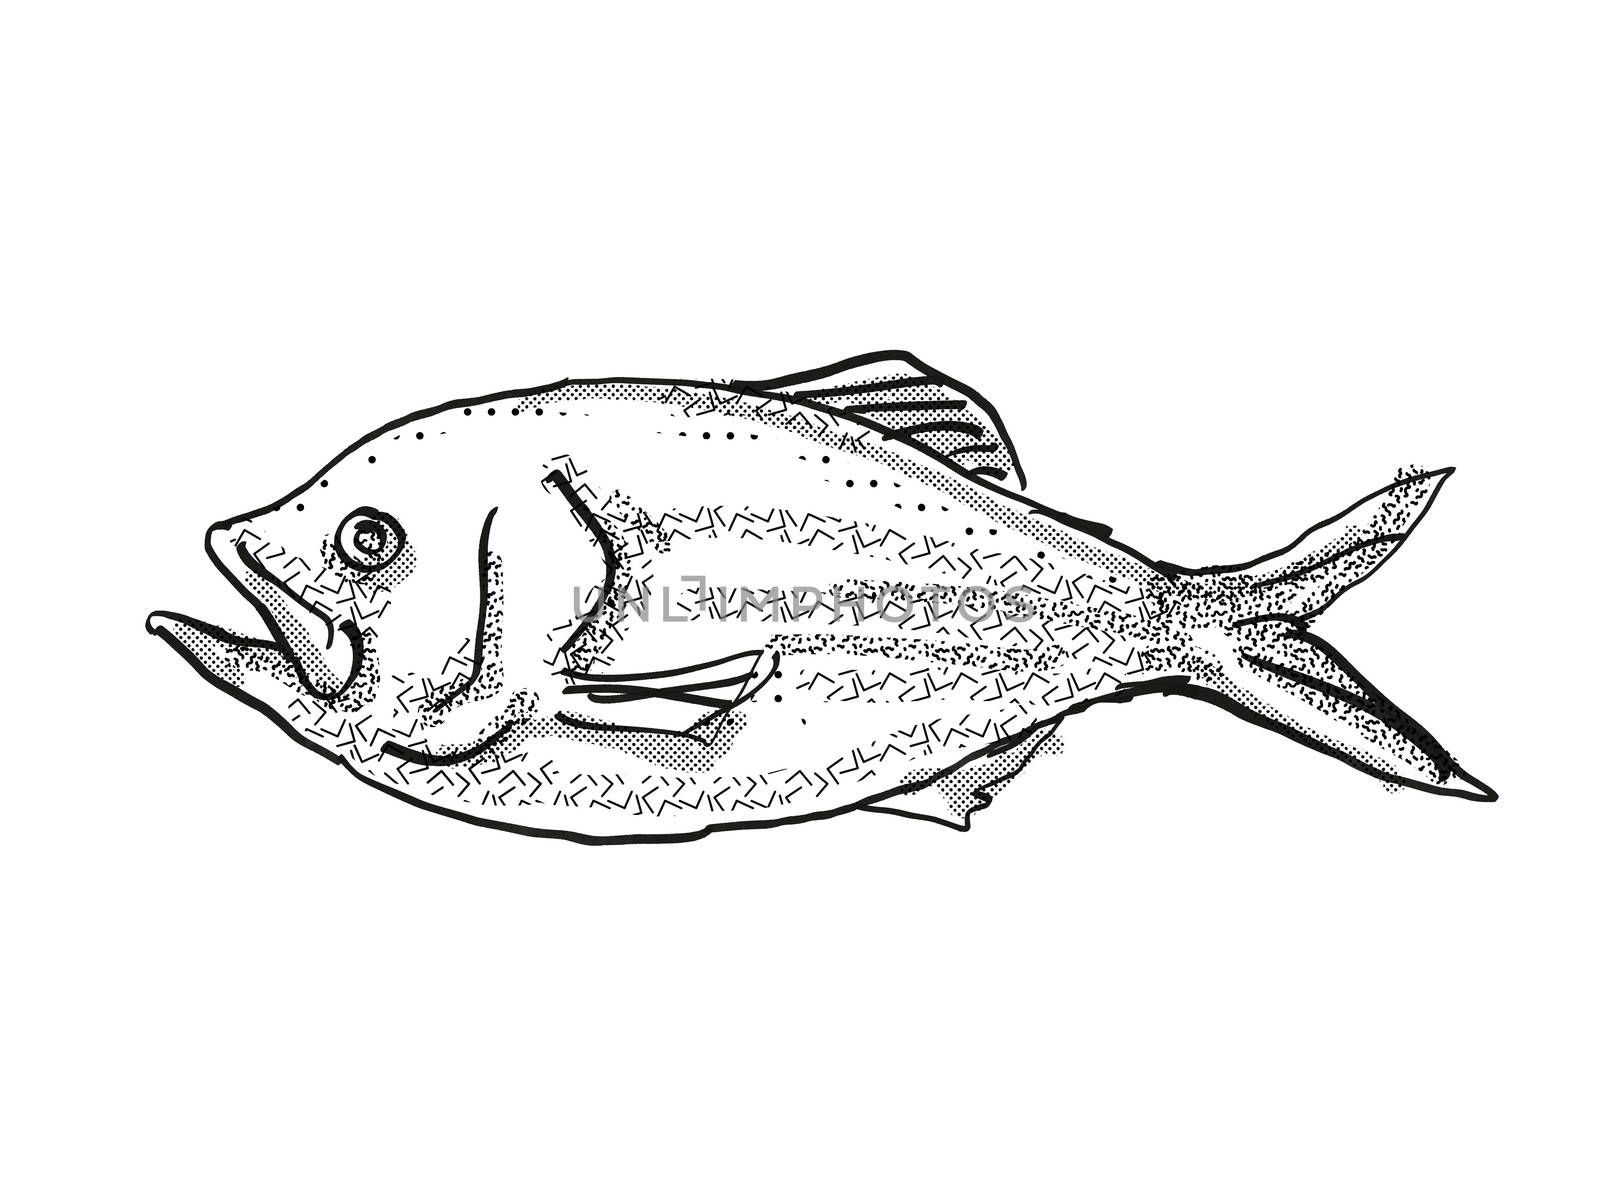 Retro cartoon style drawing of a golden snapper , a native New Zealand marine life species viewed from side on isolated white background done in black and white